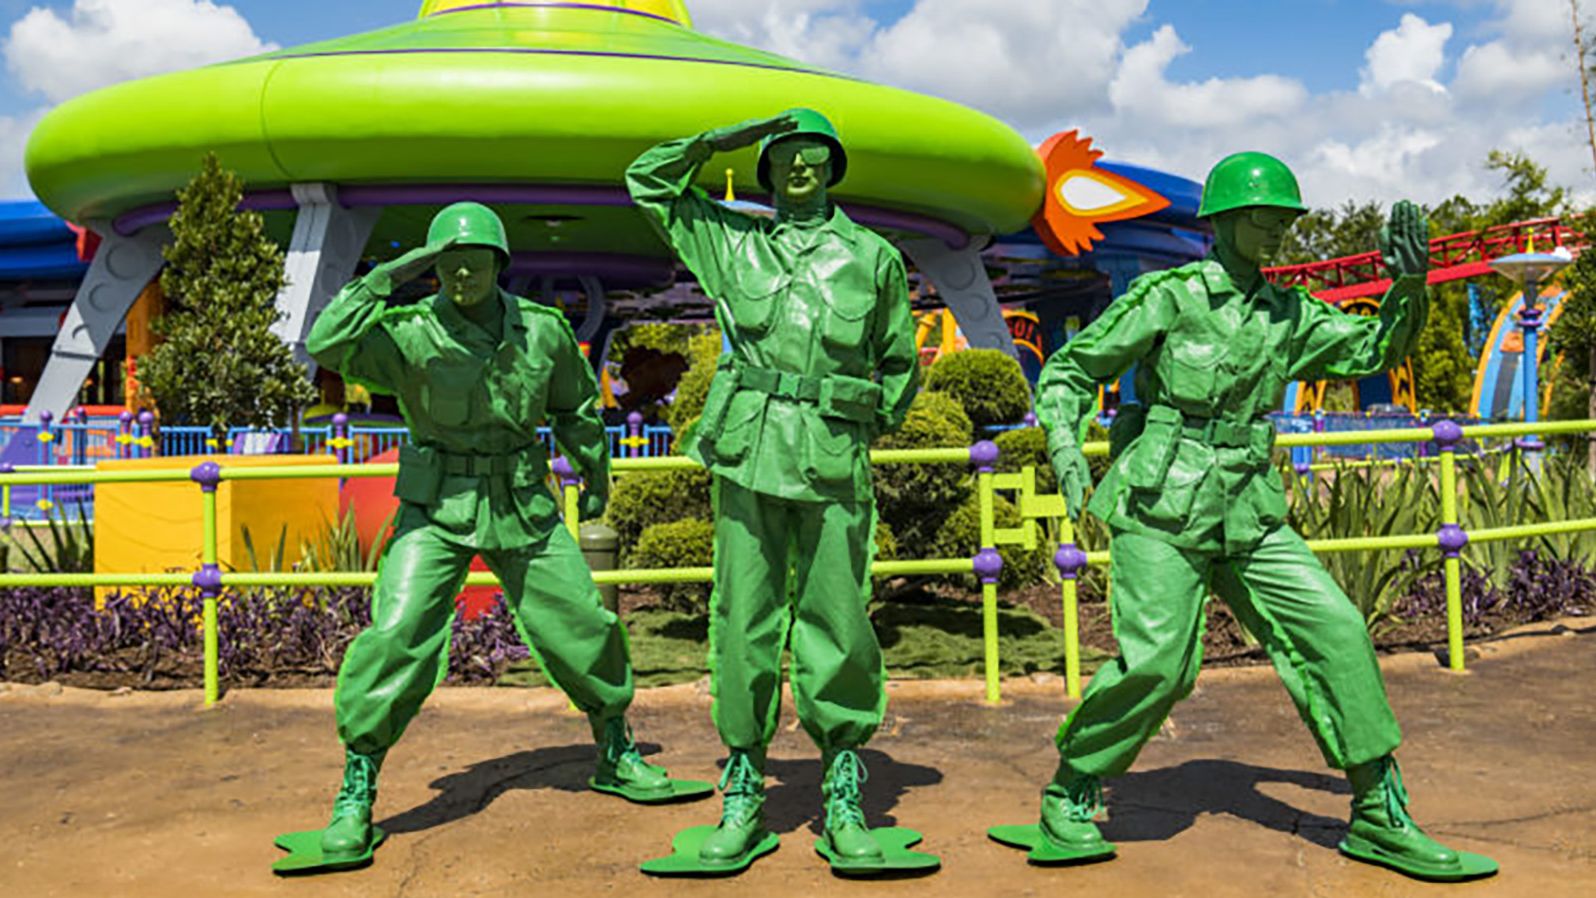 The "little green army men" will be going co-ed this weekend at Toy Story Land in Orlando.